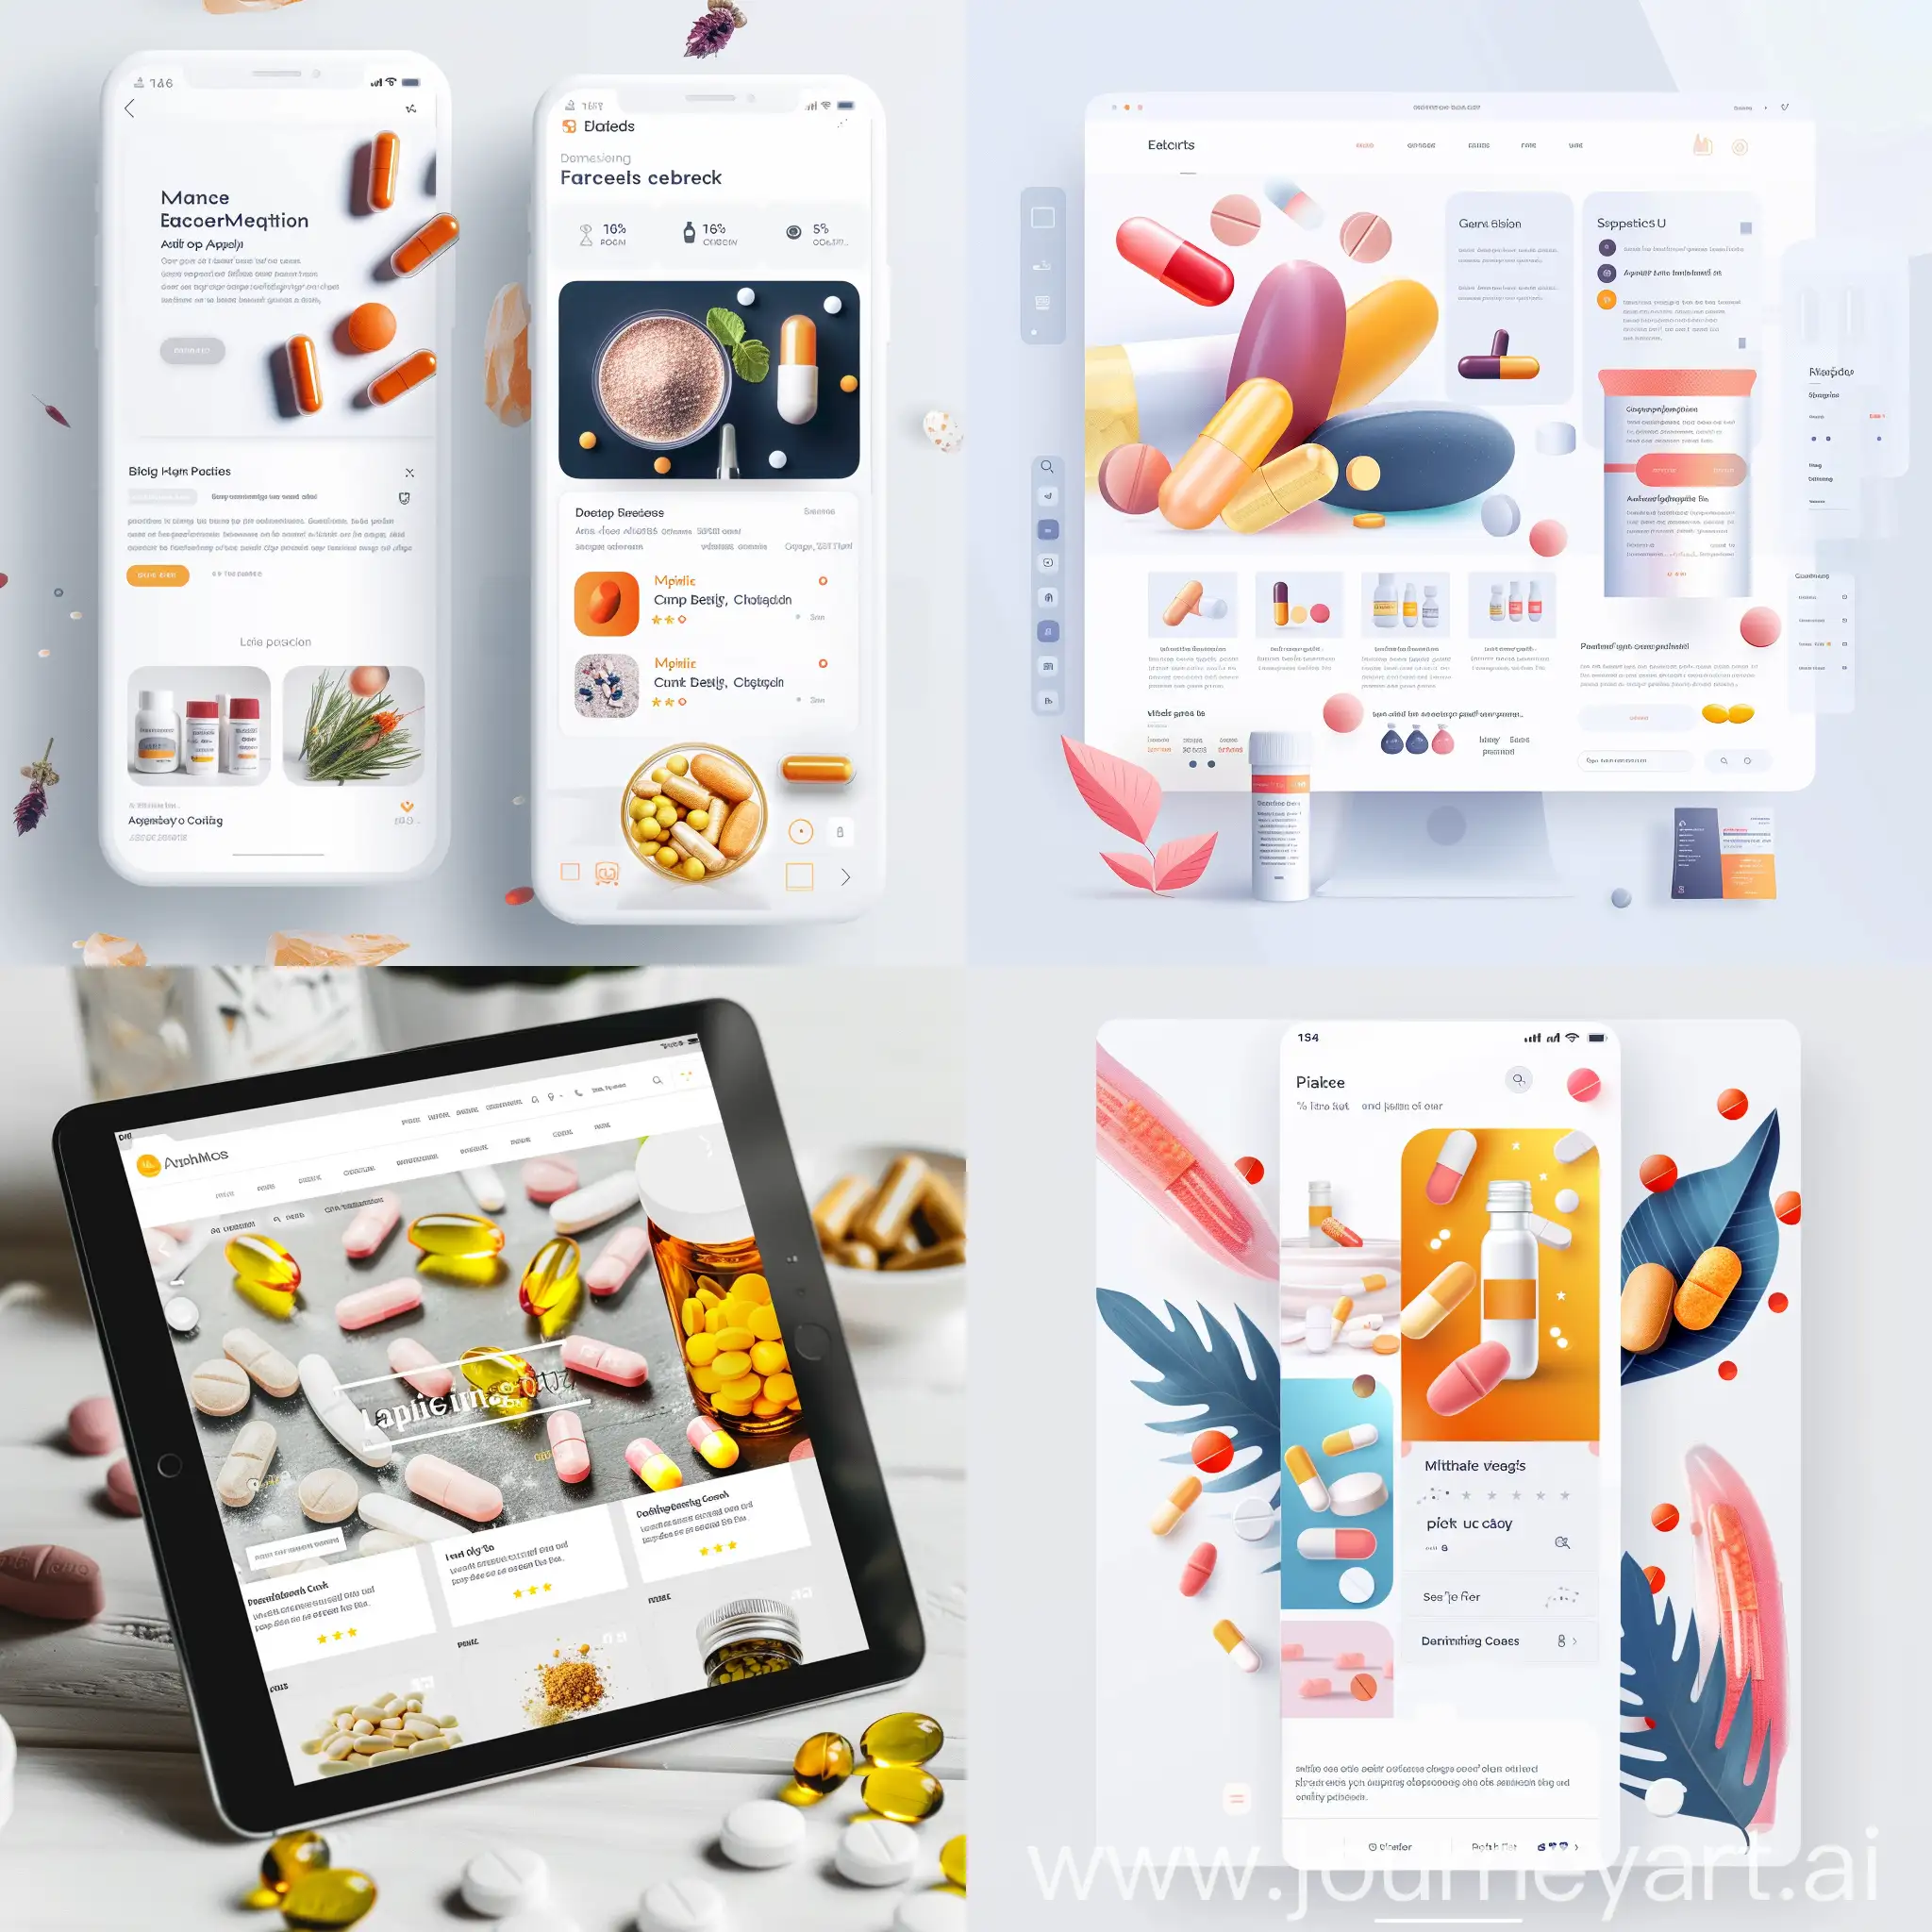 can you make ui for website which is the web platform for the users in which they can buy medicine, supplements etc regarding health and specially read the articles regarding health and fitness, medicine informations, beauty tips, skin care, latest products regarding on health like vitamins supplements, protein powder etc.